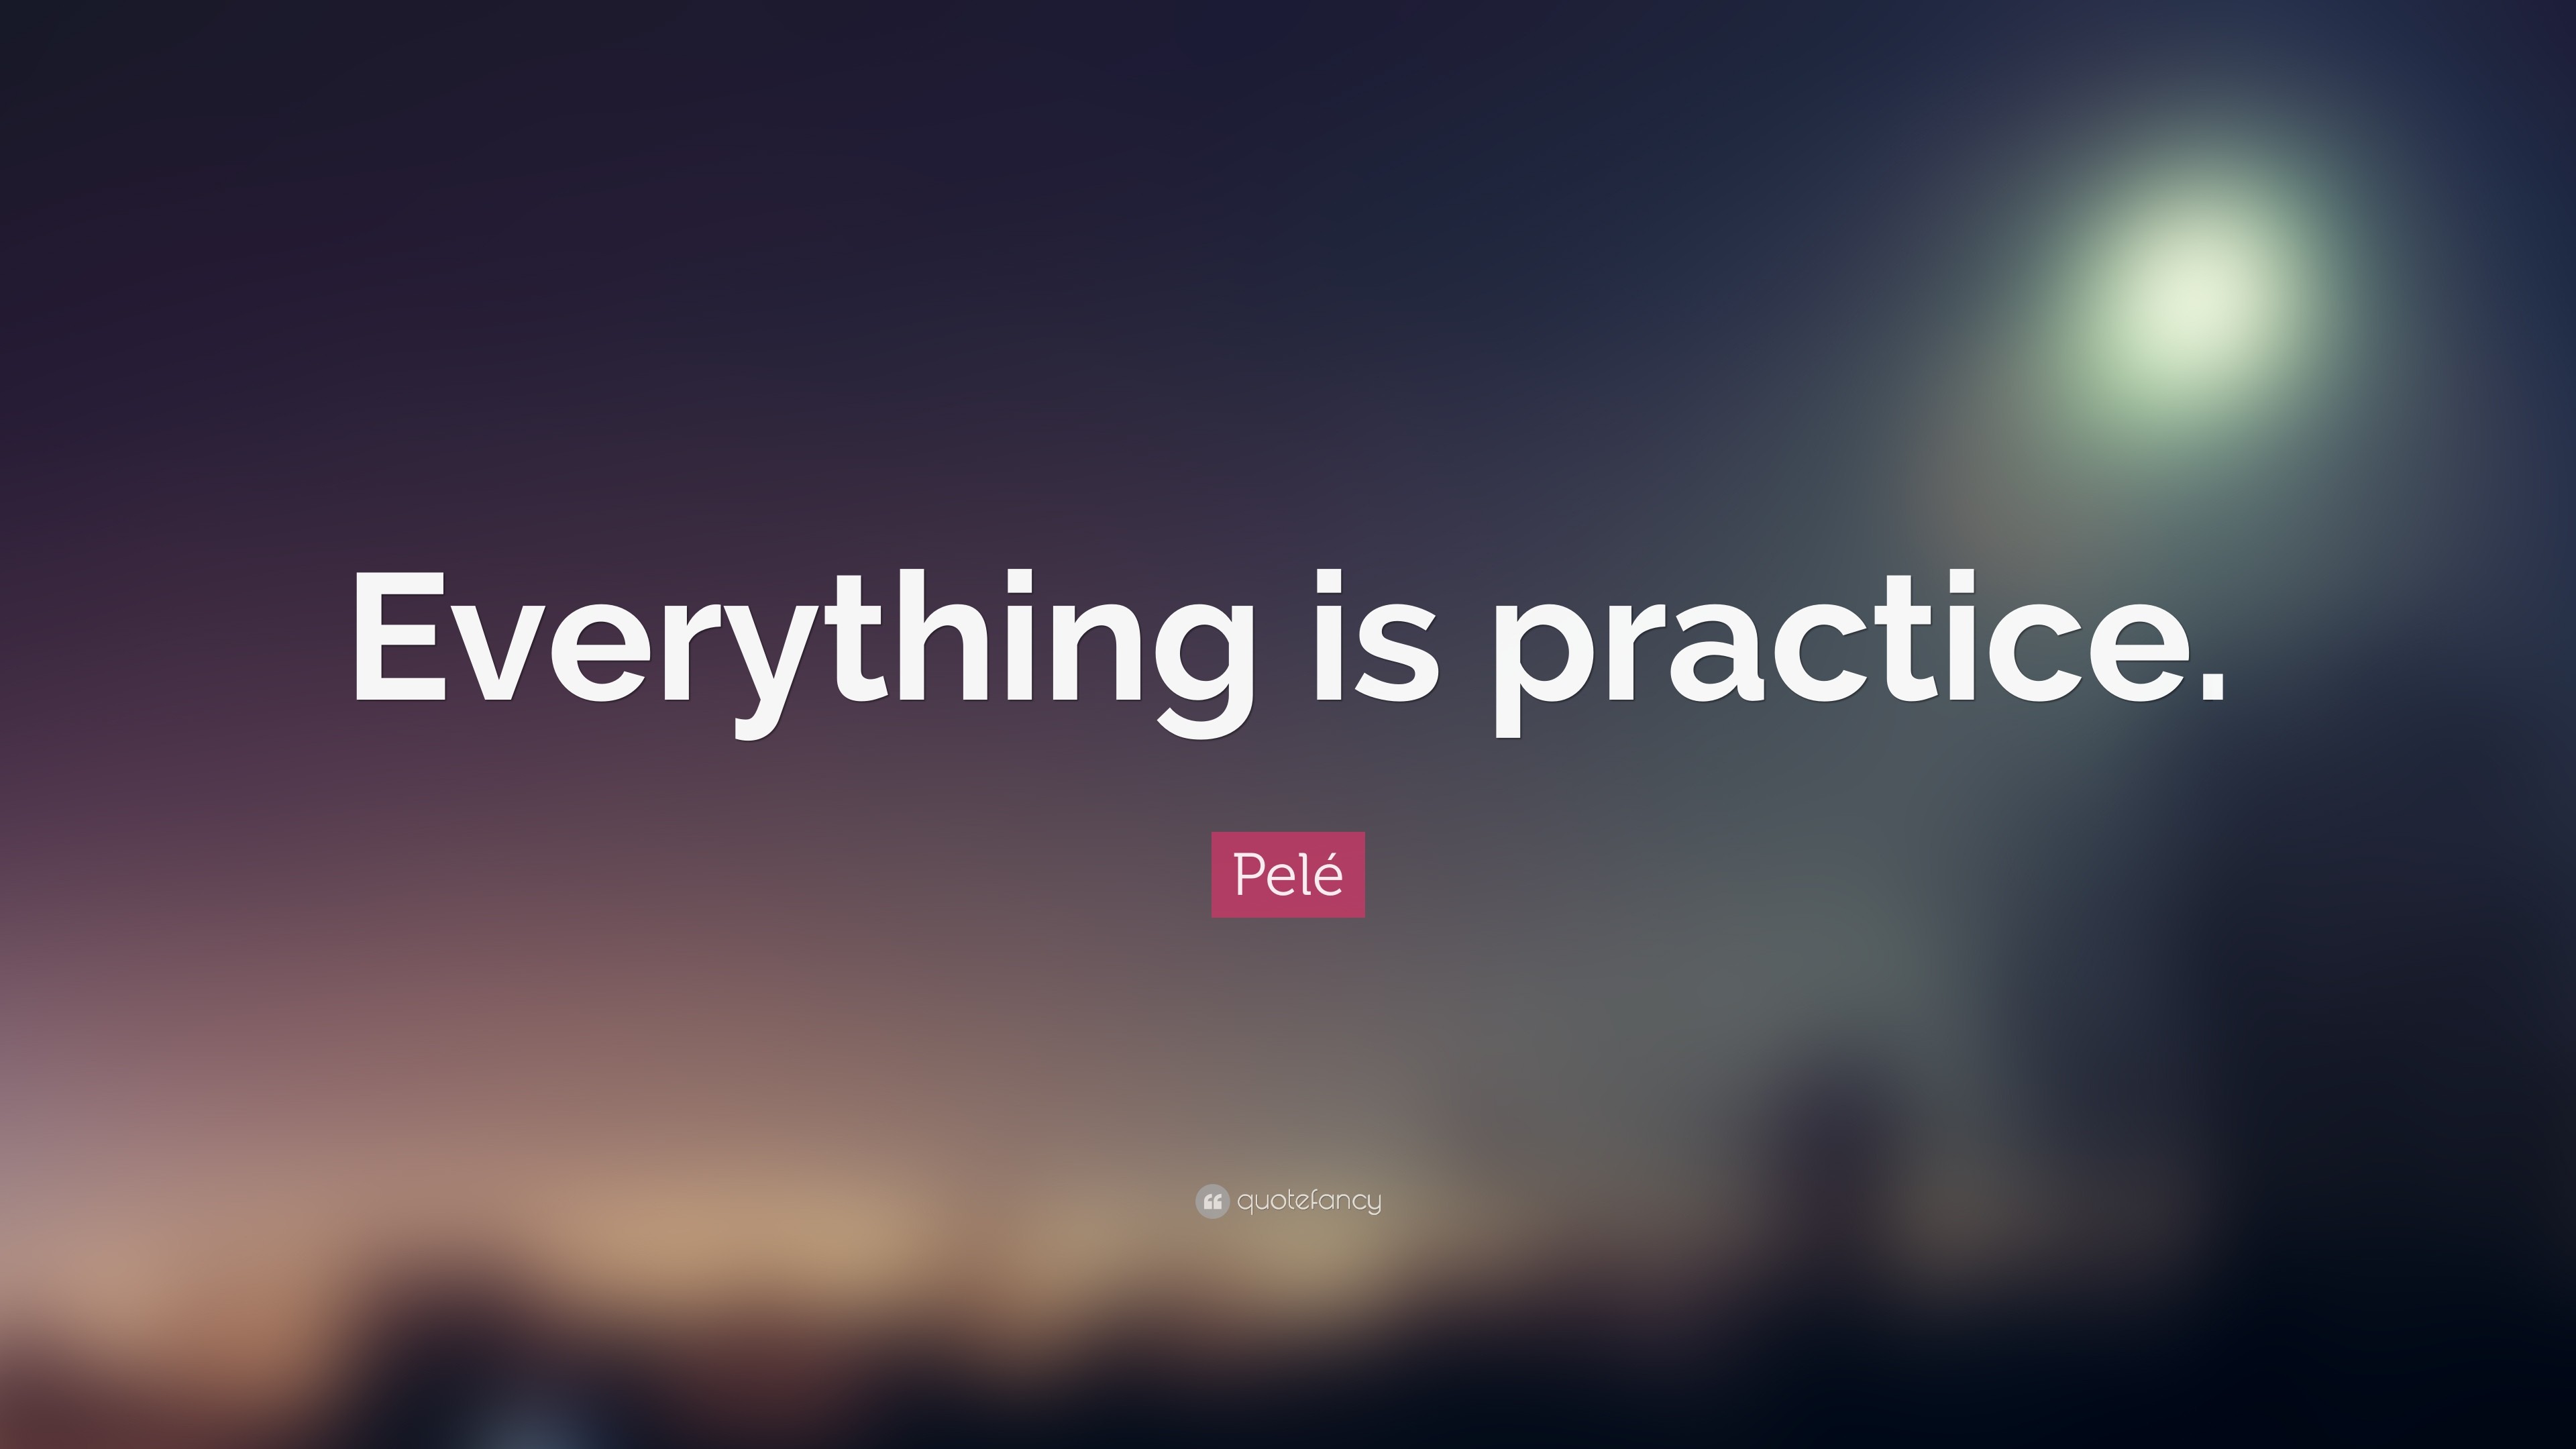 3840x2160 PelÃ© Quote: “Everything is practice.”